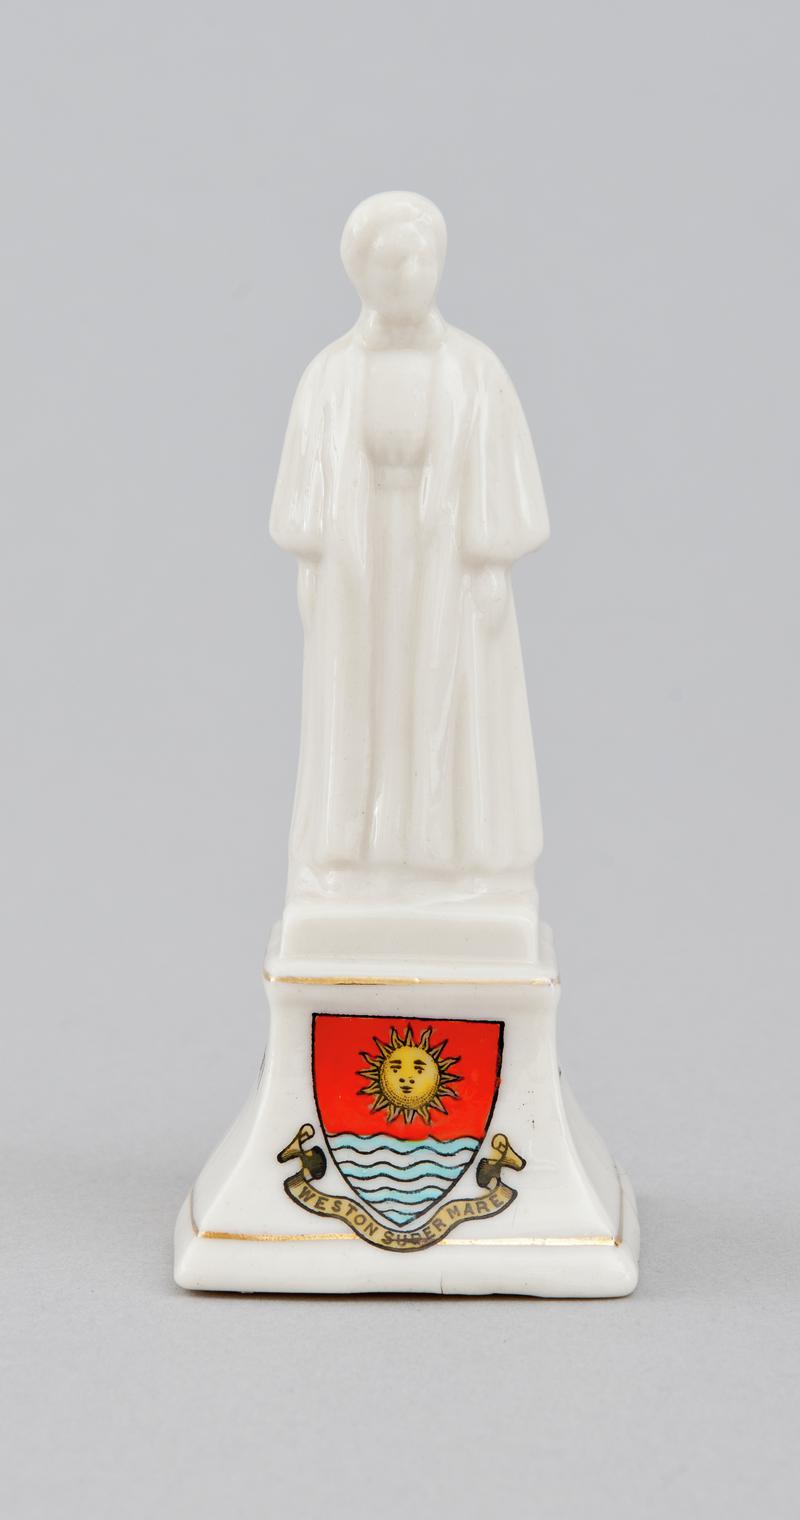 Figurine of Edith Cavell based on the memorial in Charing Cross